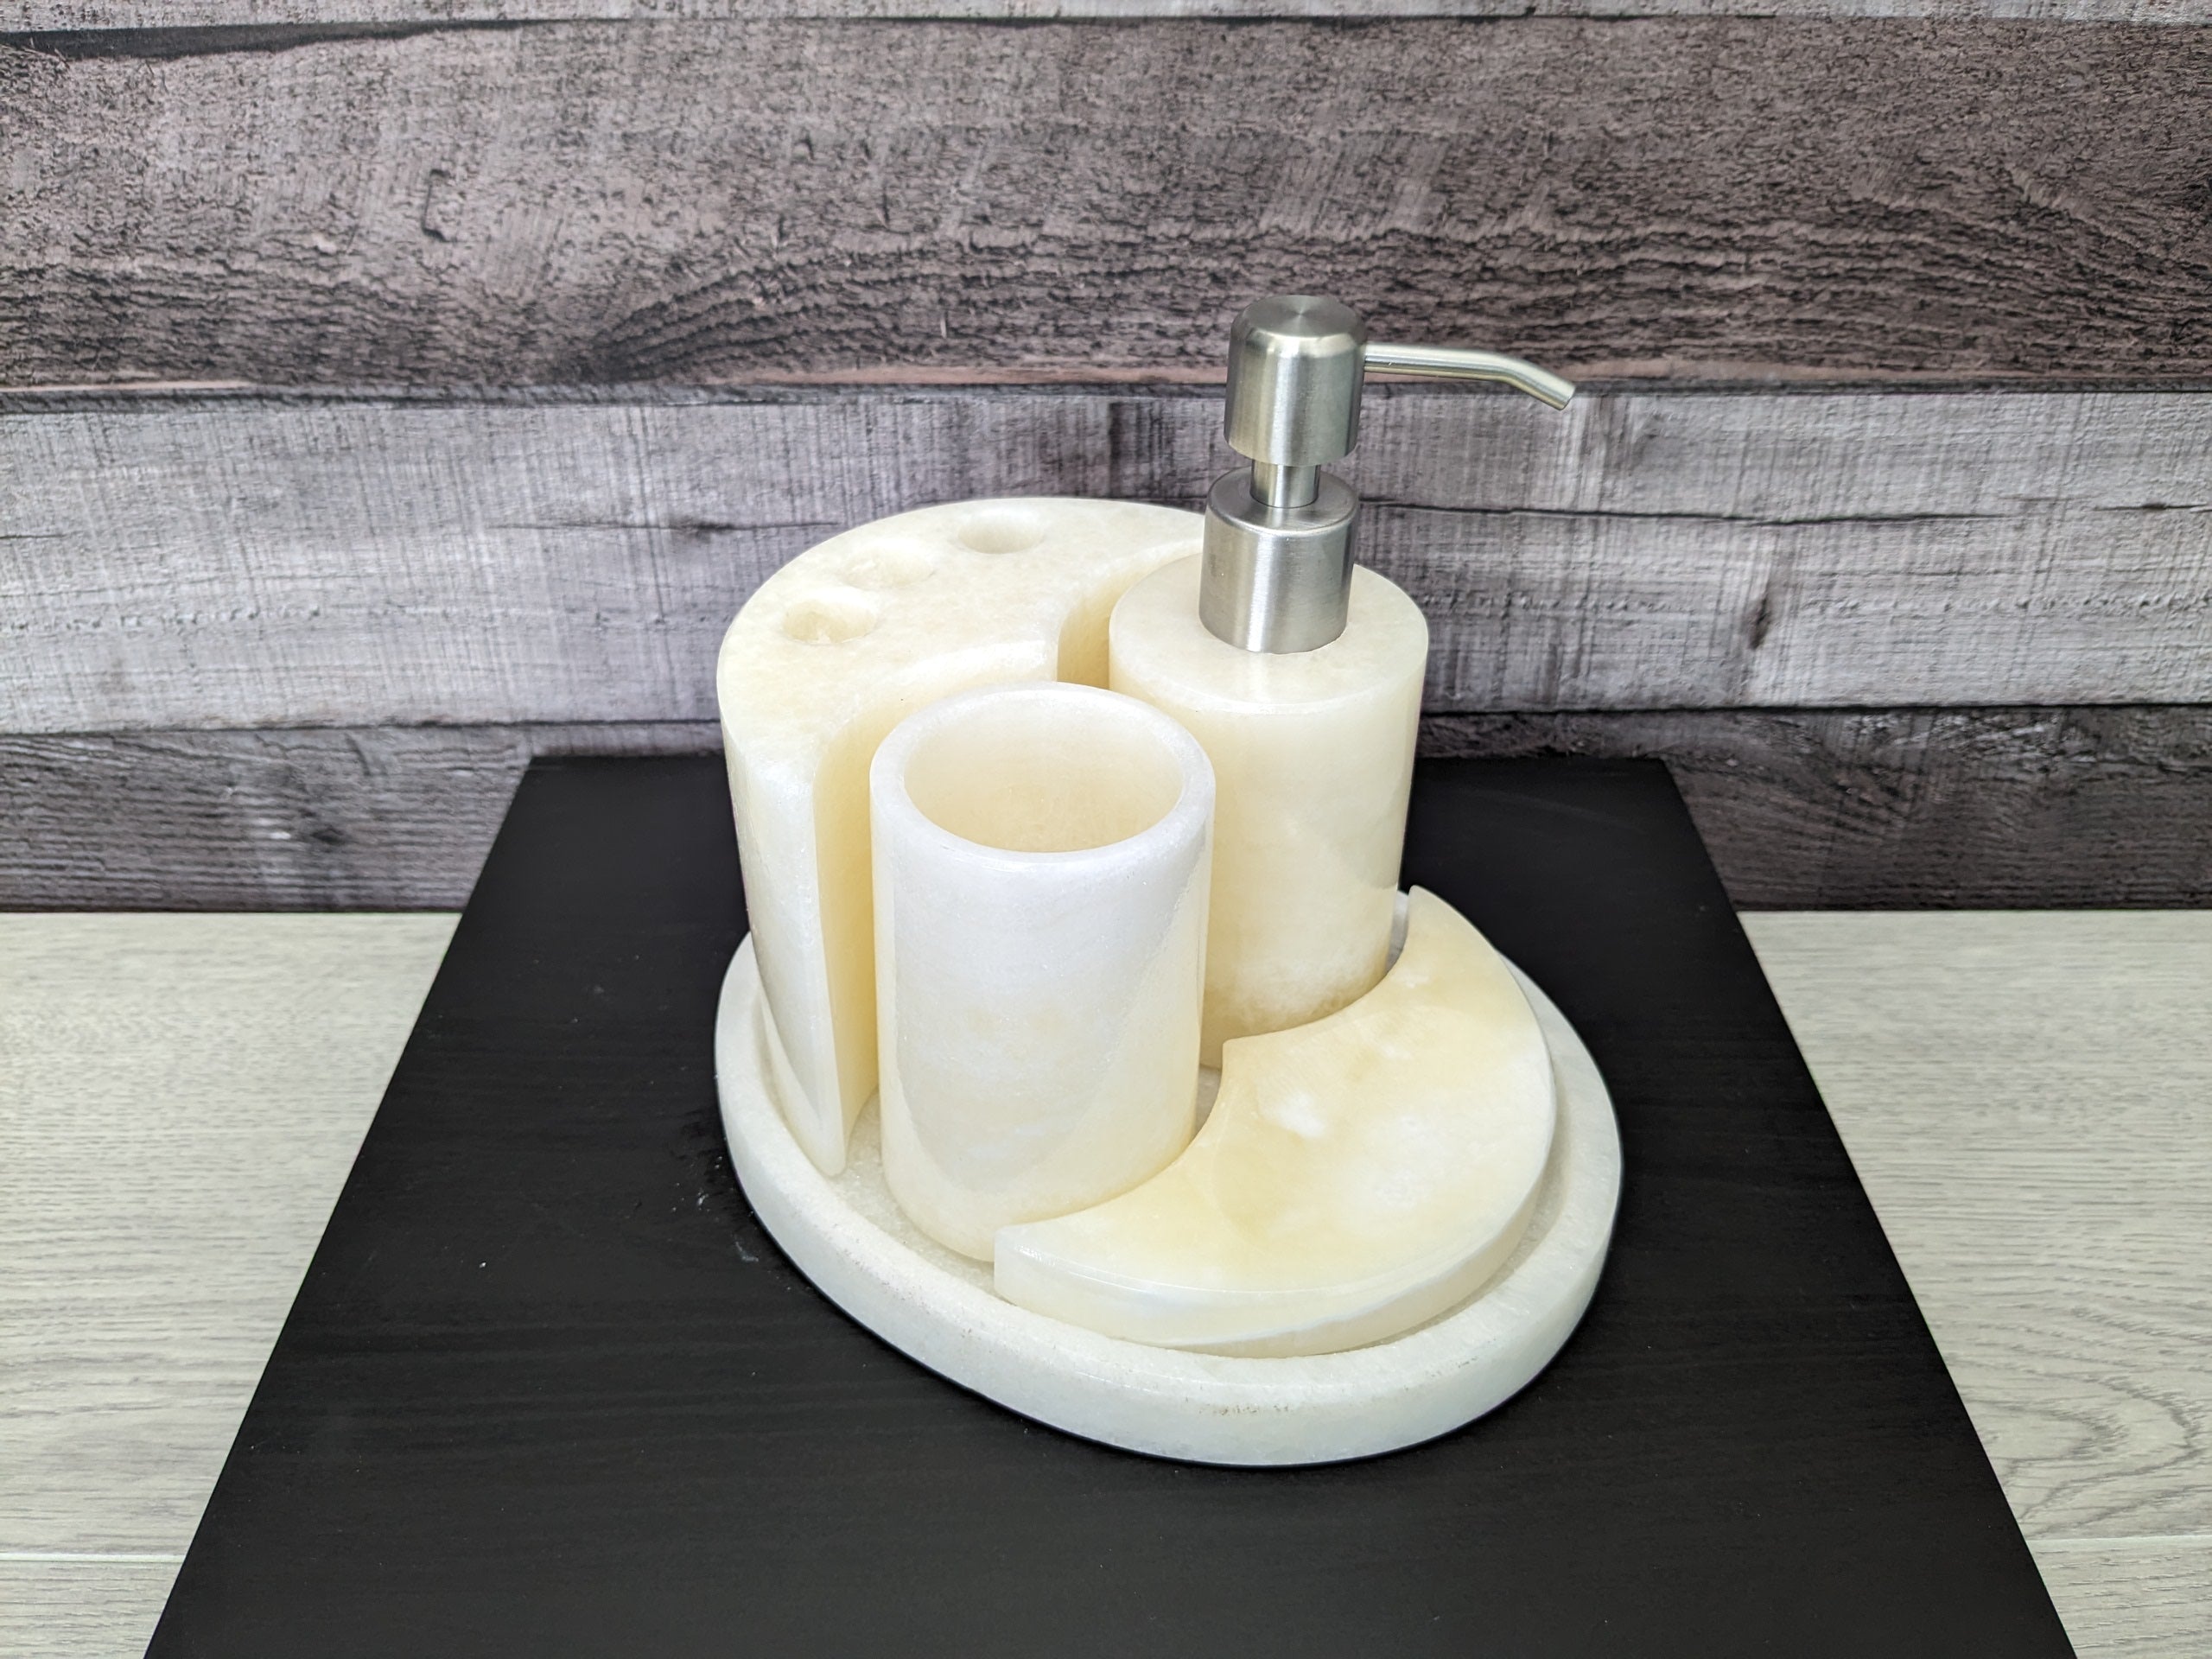 Ivory Onyx Bathroom Accessory Set. Handmade in Mexico. We package and ship from the USA. Buy now at www.felipeandgrace.com.